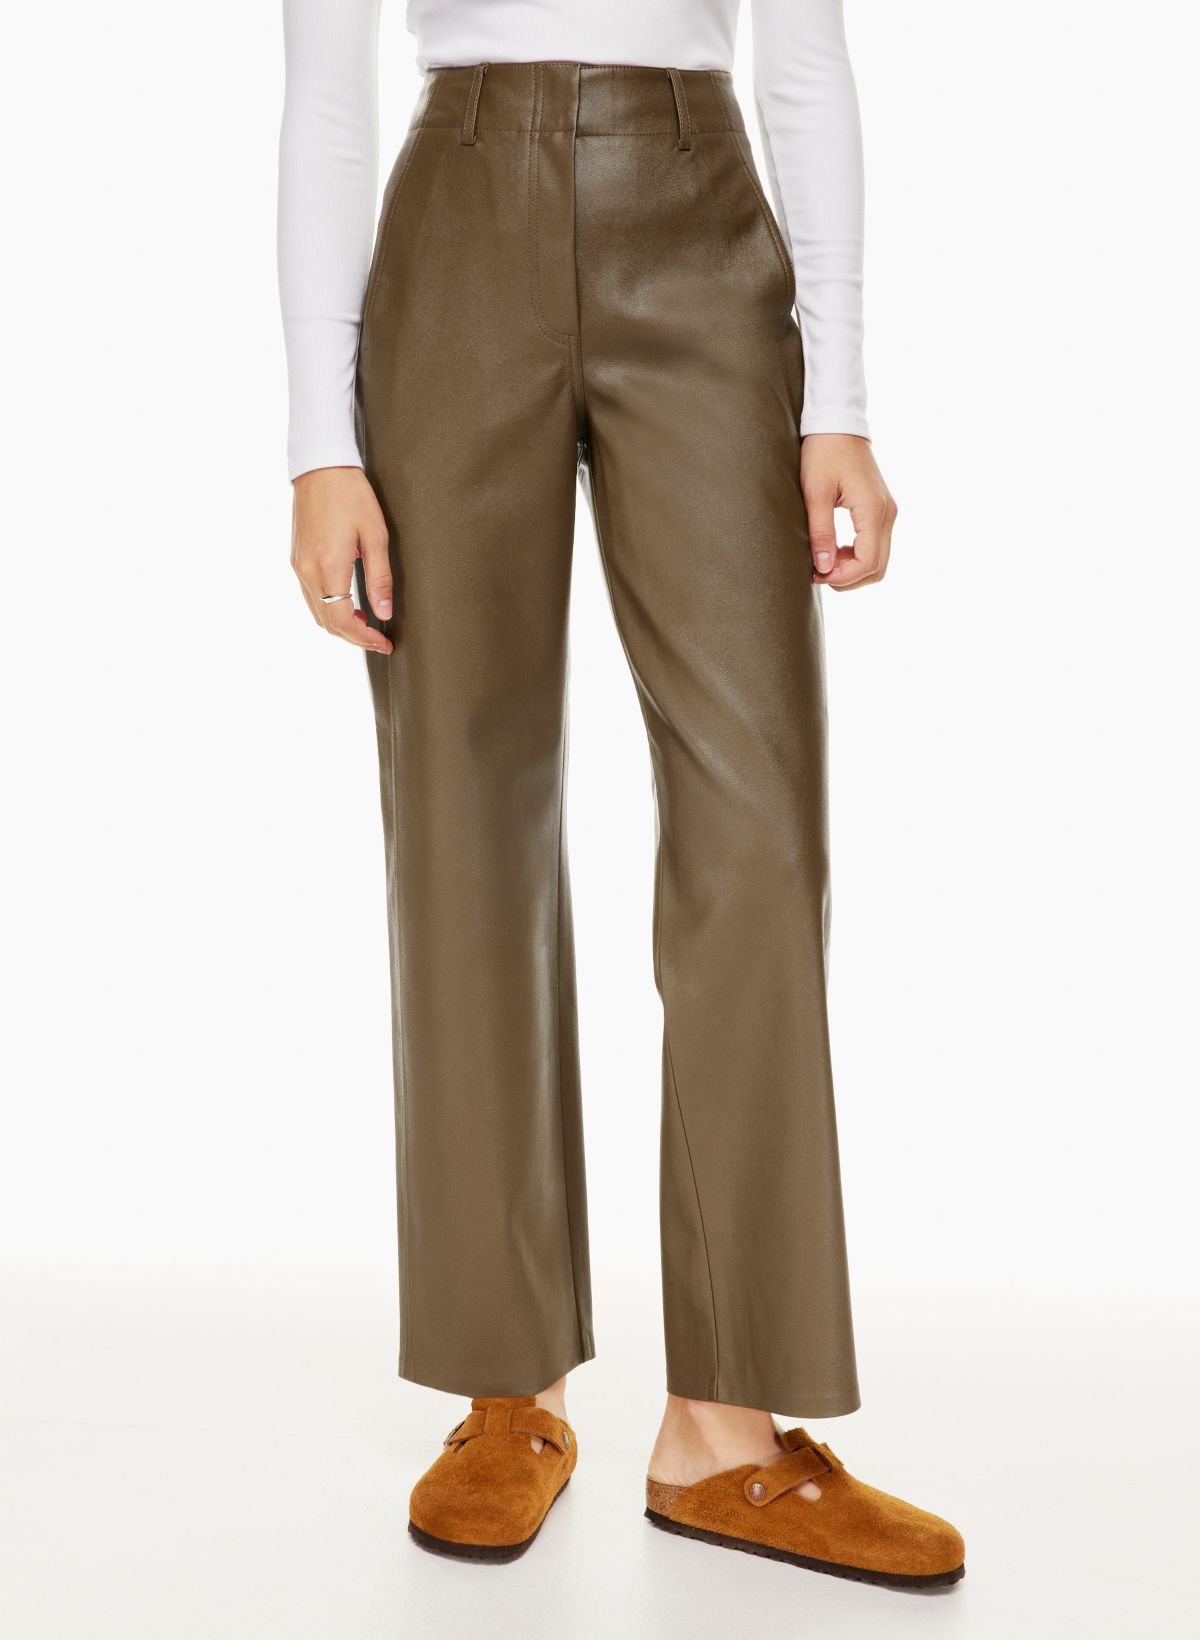 Styling Leather Pants & Aritzia Melina Pant Review (Cropped)